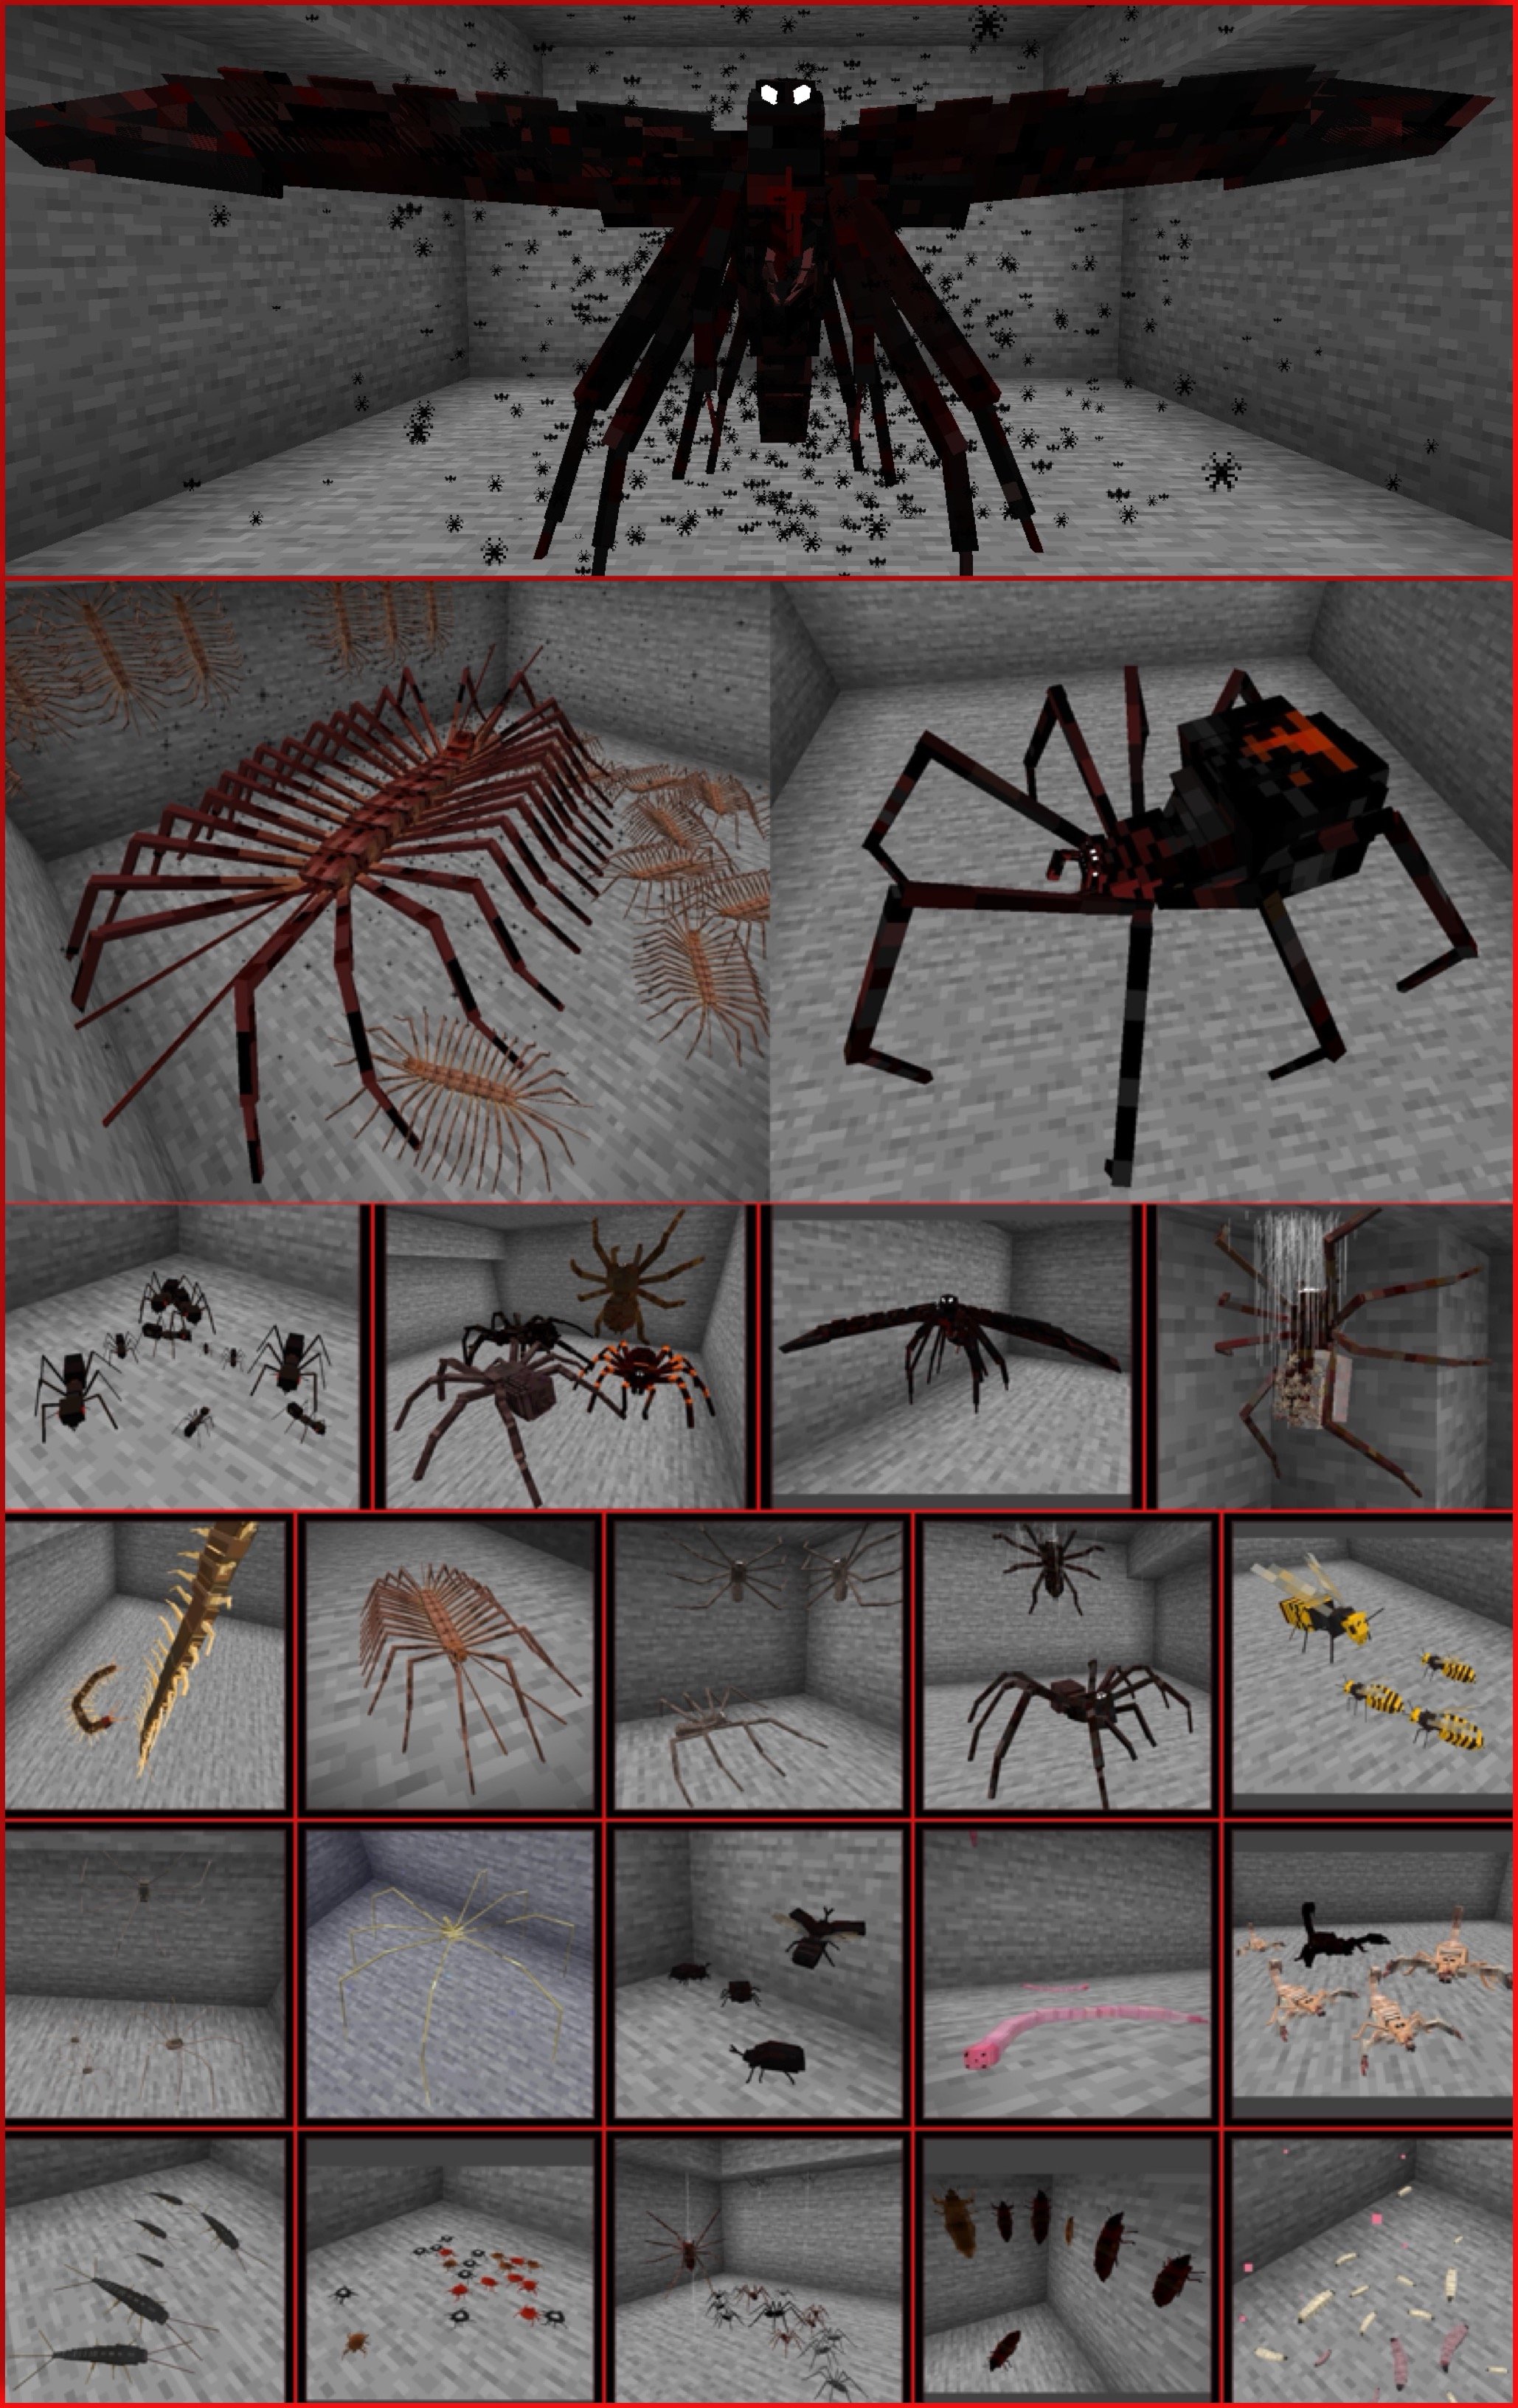 Spider Moth at the top, minibosses second row, and other arthropods below.